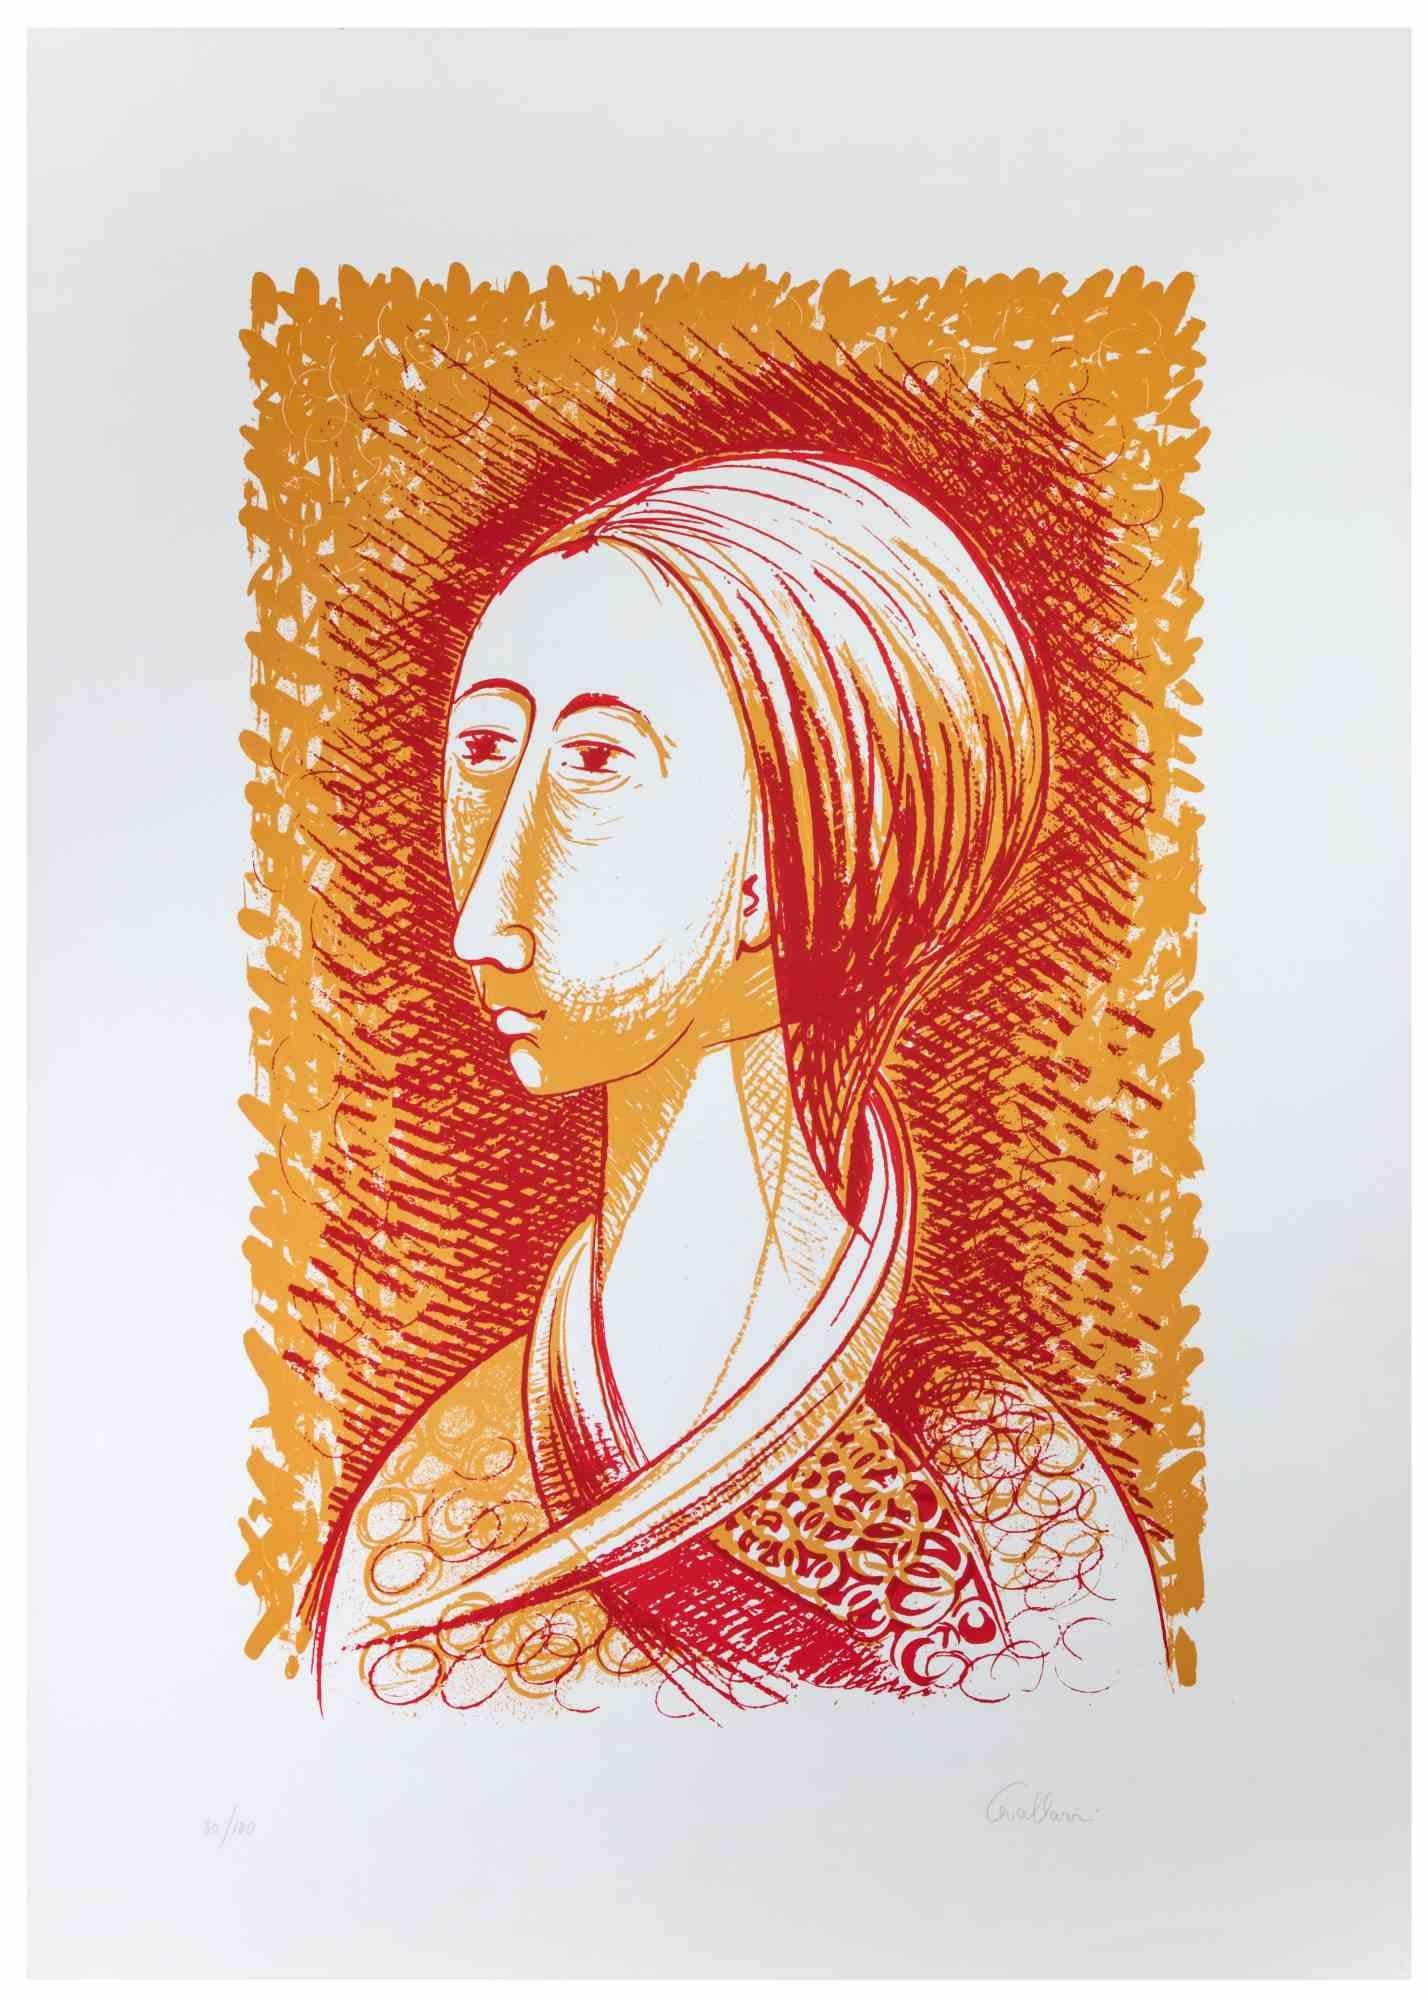 The Woman in Red is a lithograph on paper realized by Alberto Cavallari in the 1970s.

Hand-signed, and numbered, edition of 100 prints.

Good conditions.